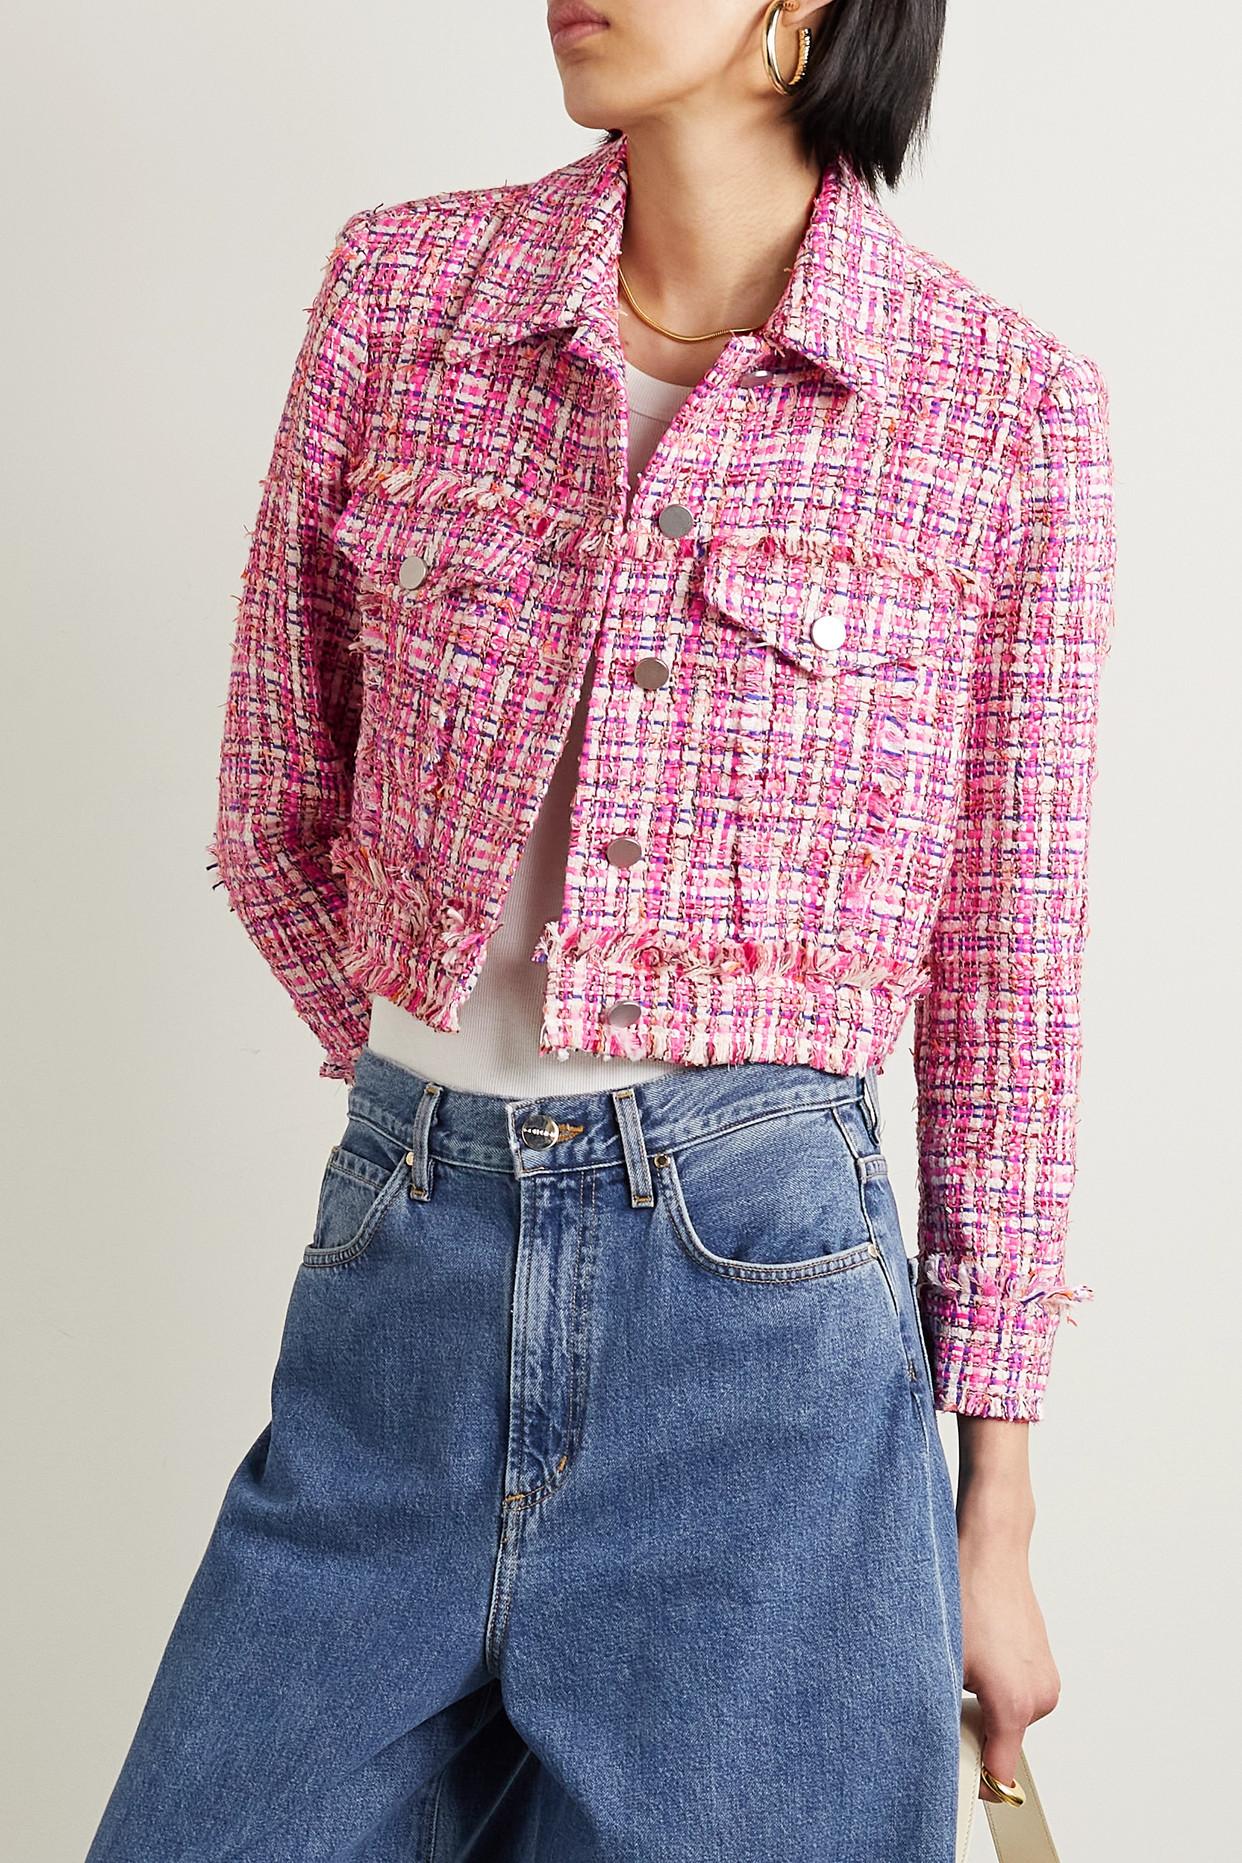 Alice + Olivia Chloe Cropped Frayed Bouclé Jacket in Pink | Lyst